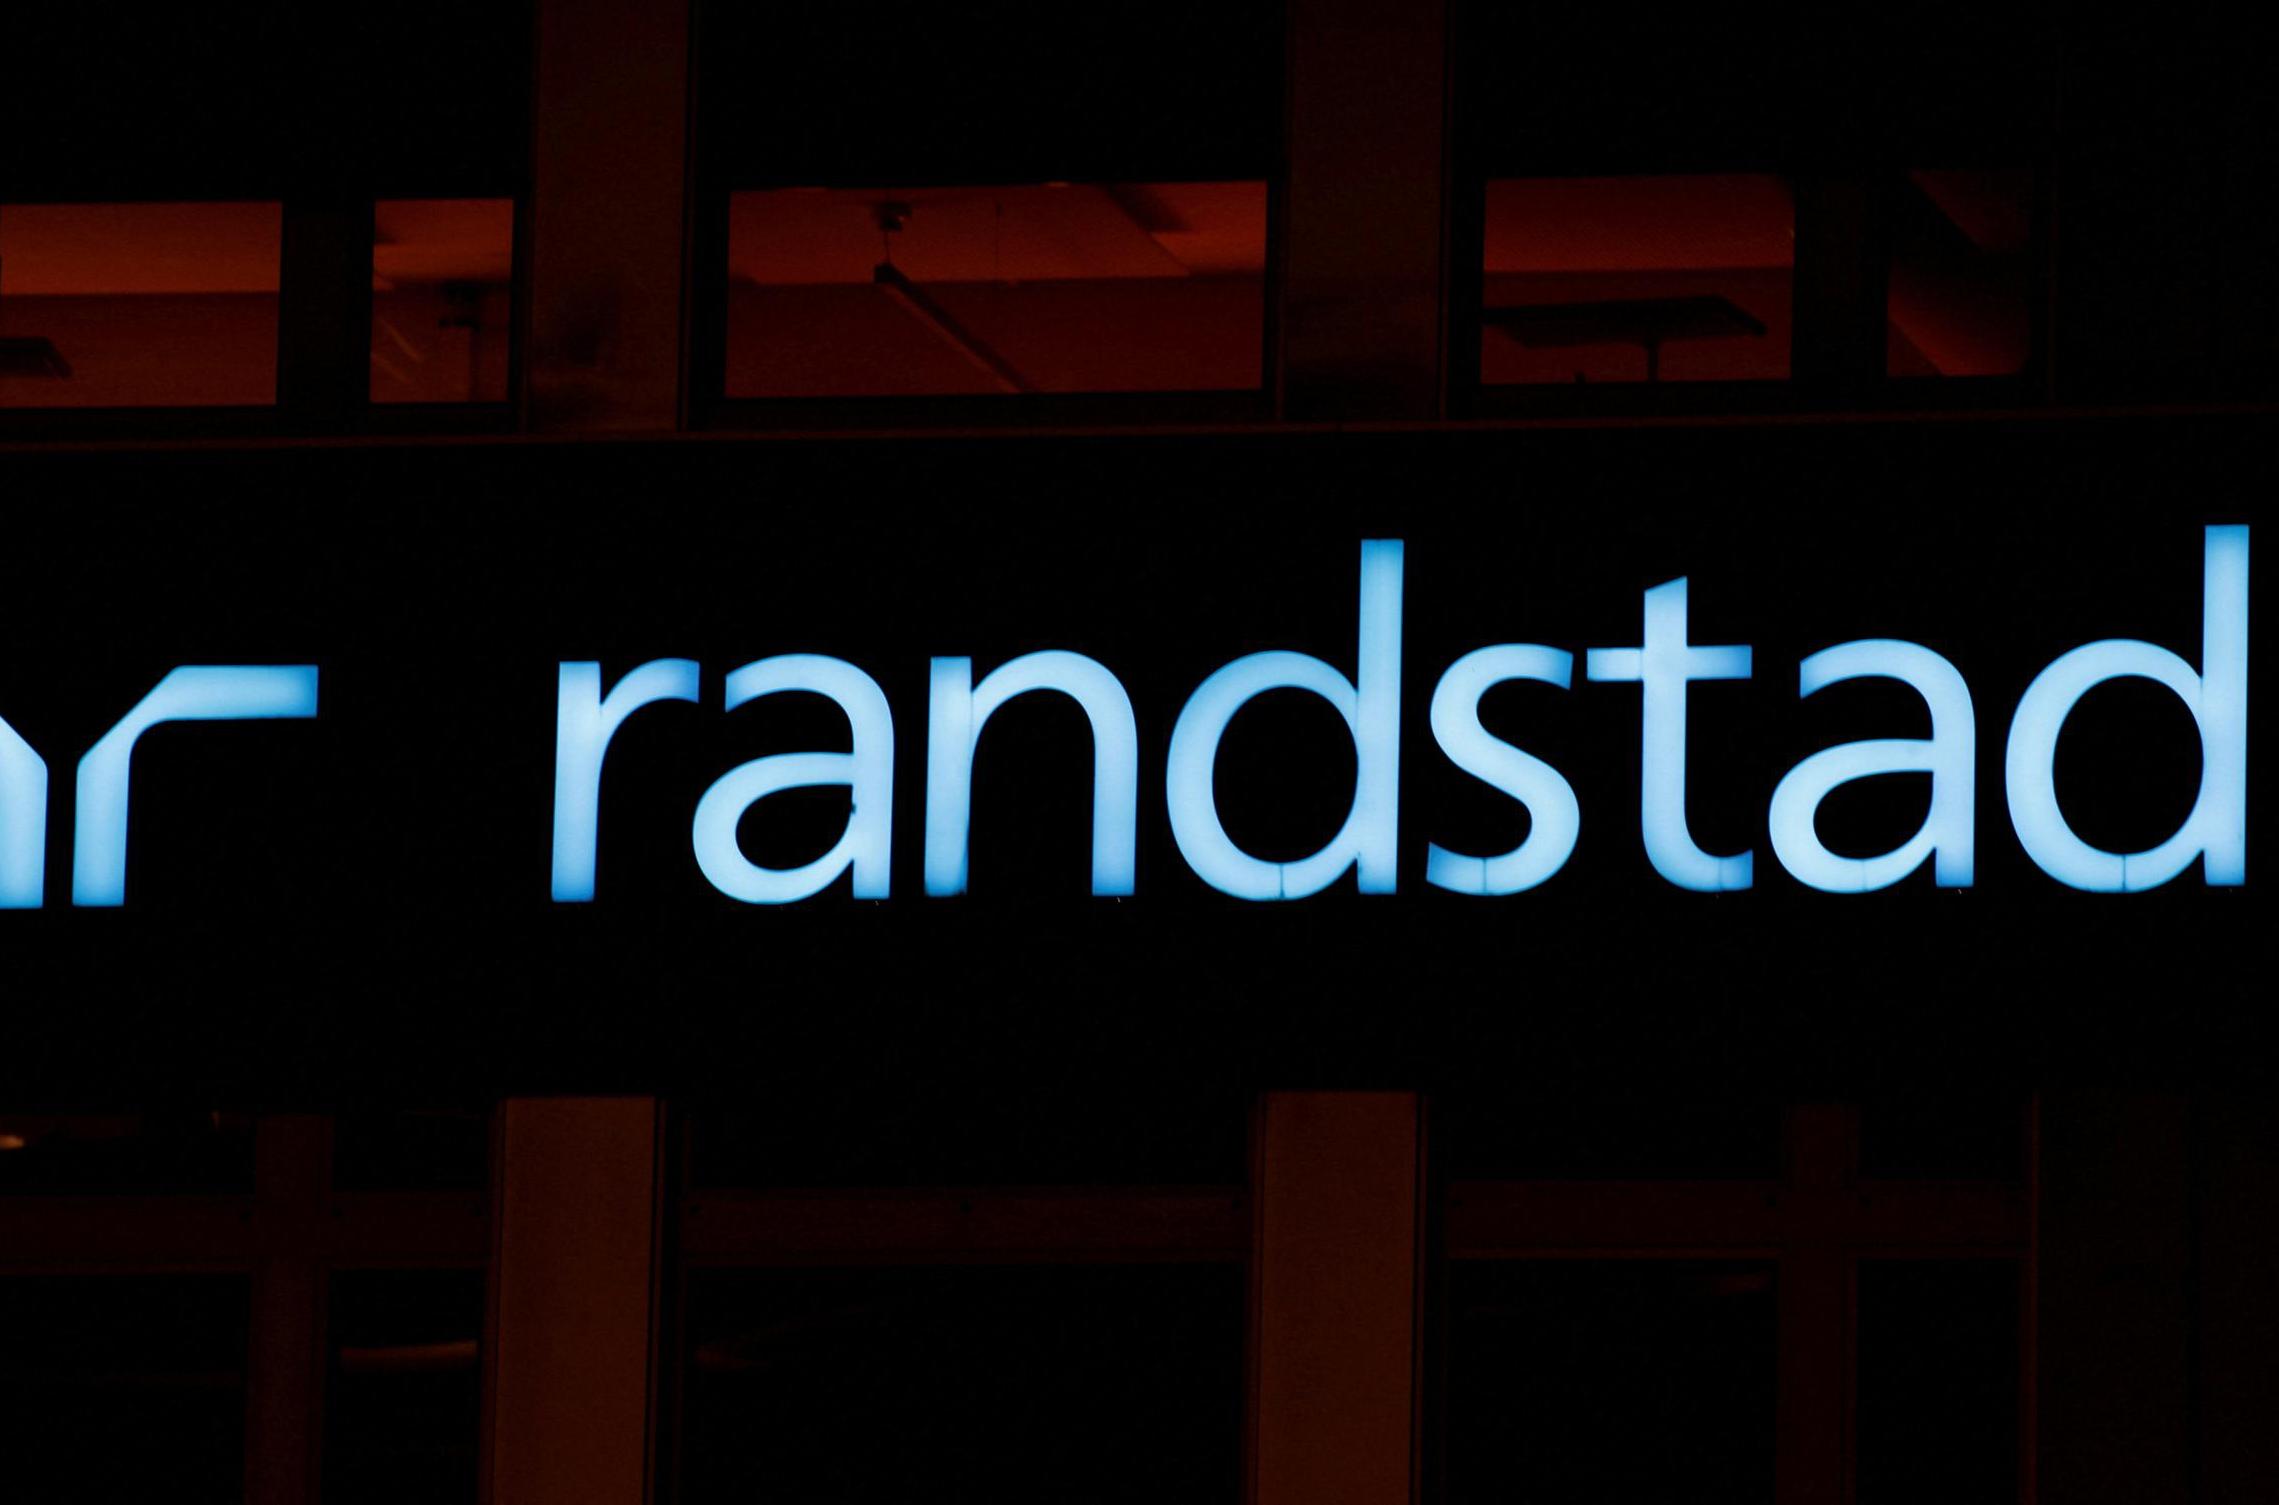 Companies are more cautious in hiring due to uncertain economy, says Randstad